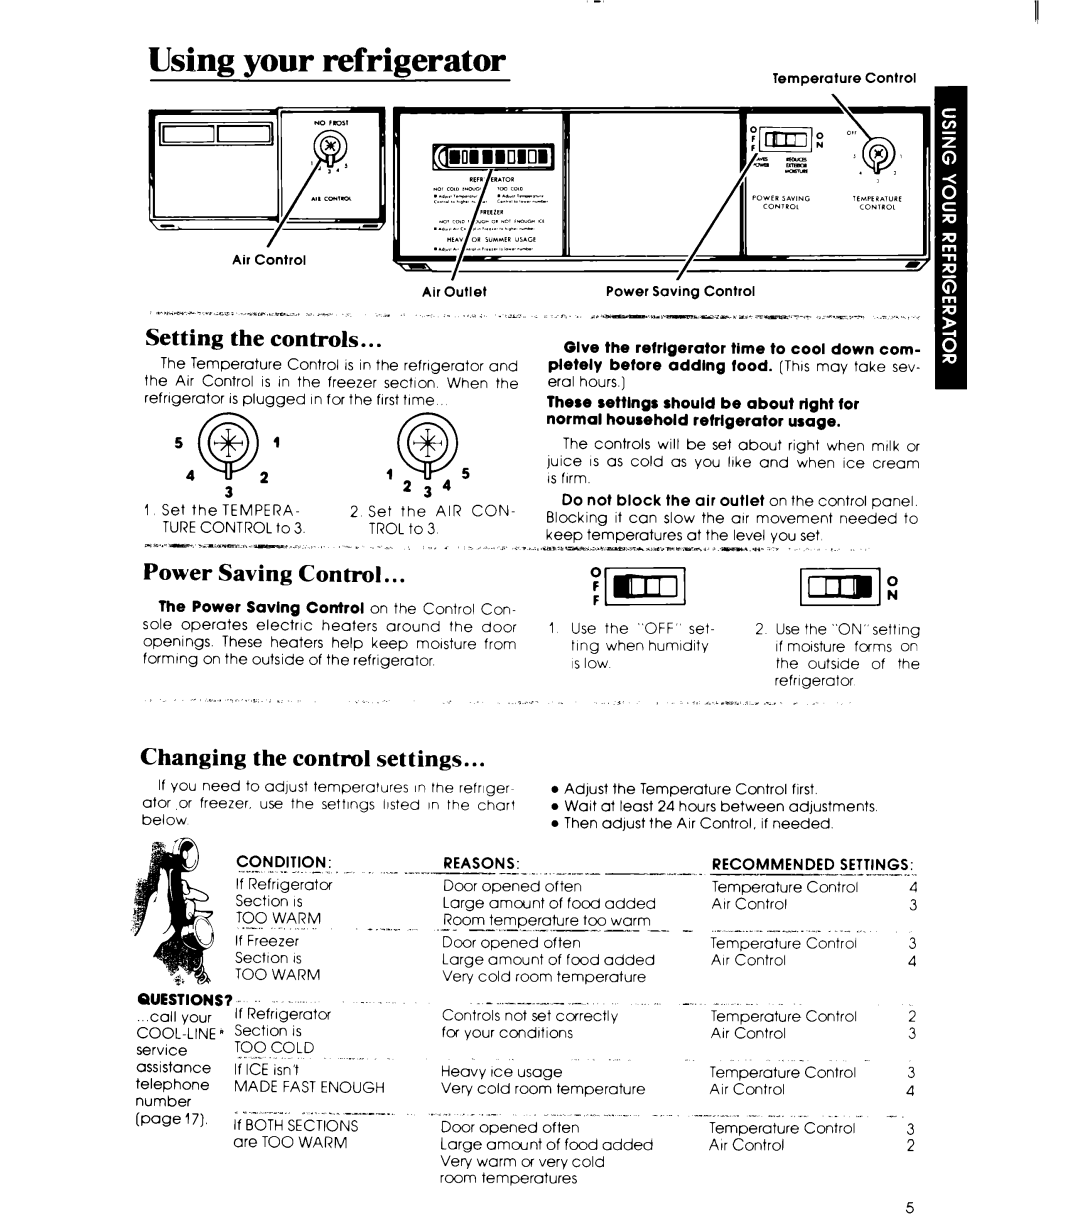 Whirlpool ED25SM manual 54@21, Using your refrigerator, Power Saving Control, Changing the control settings 